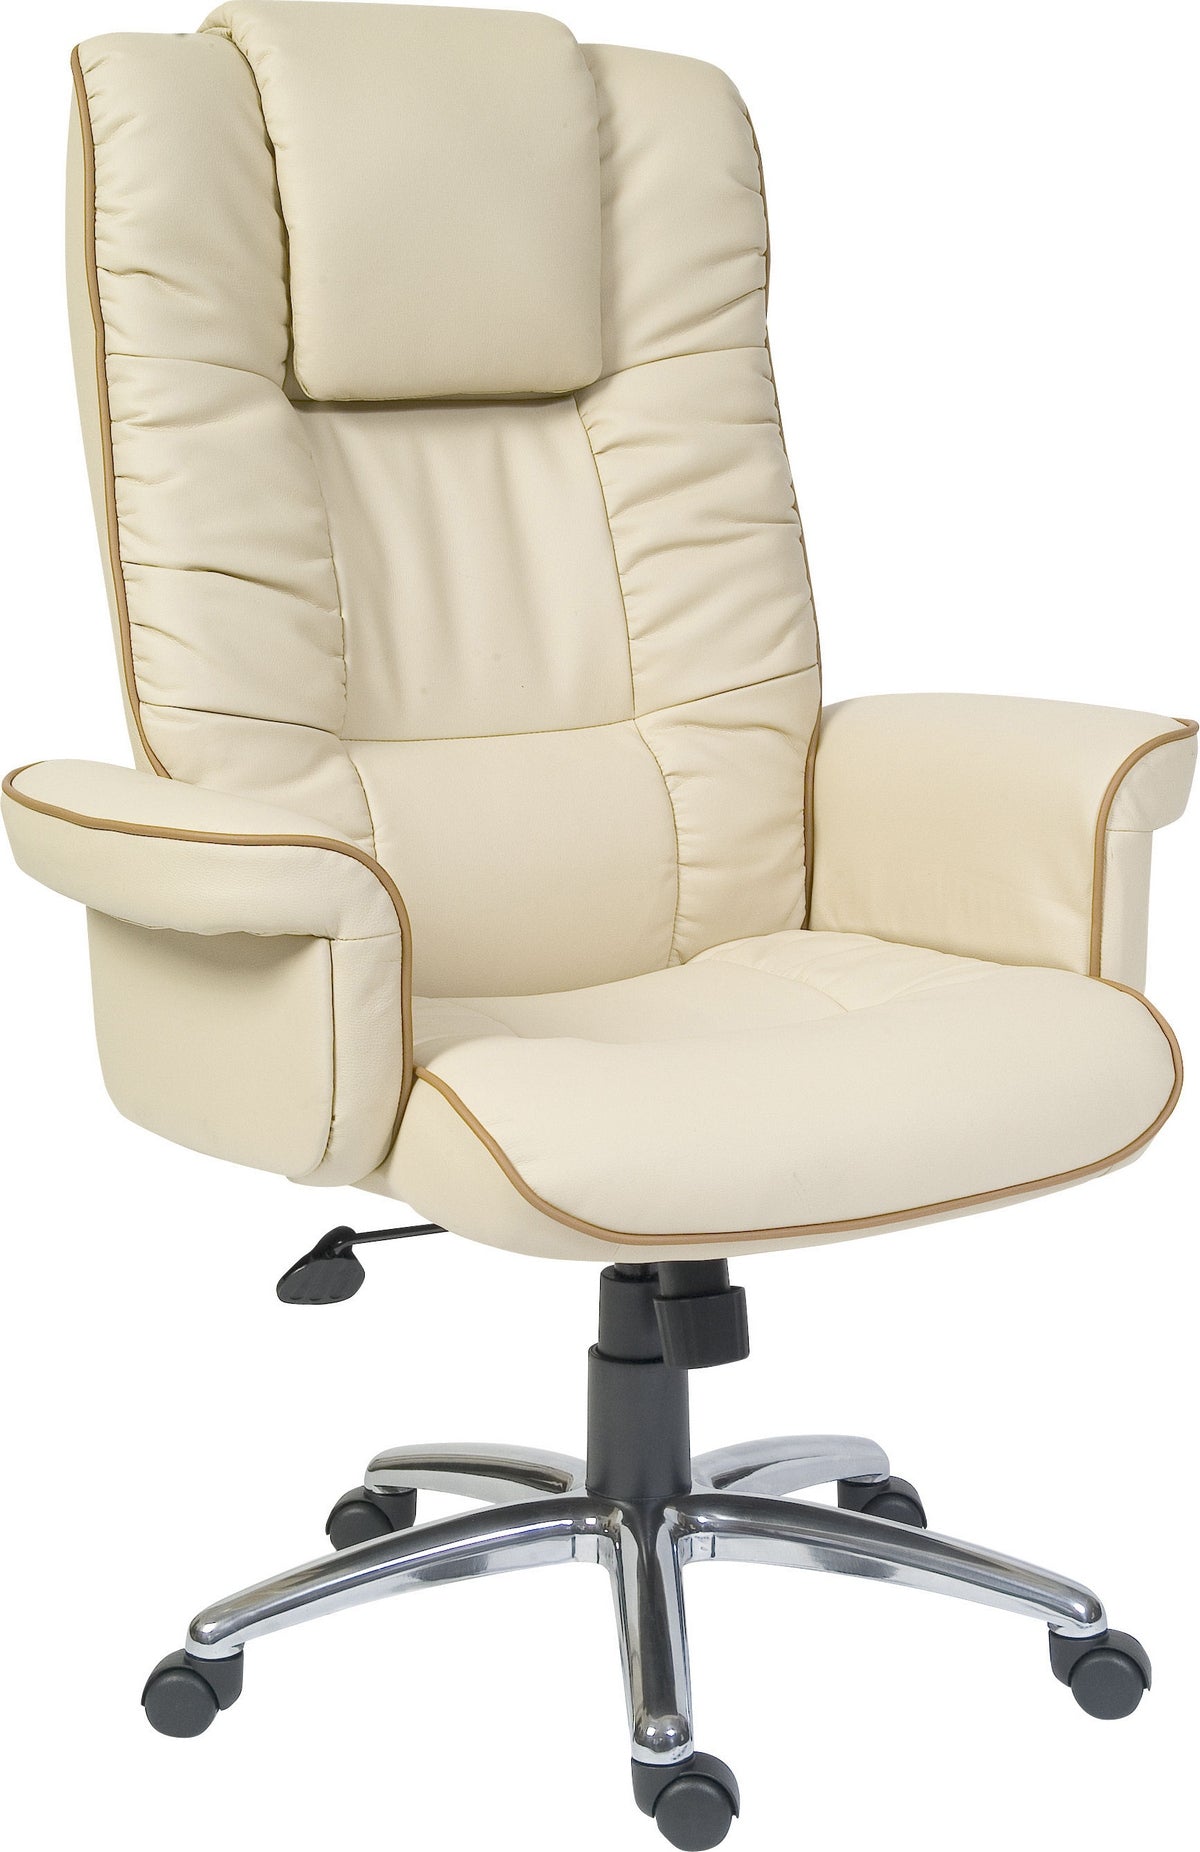 Cream Leather Executive Office Chair - WINDSOR